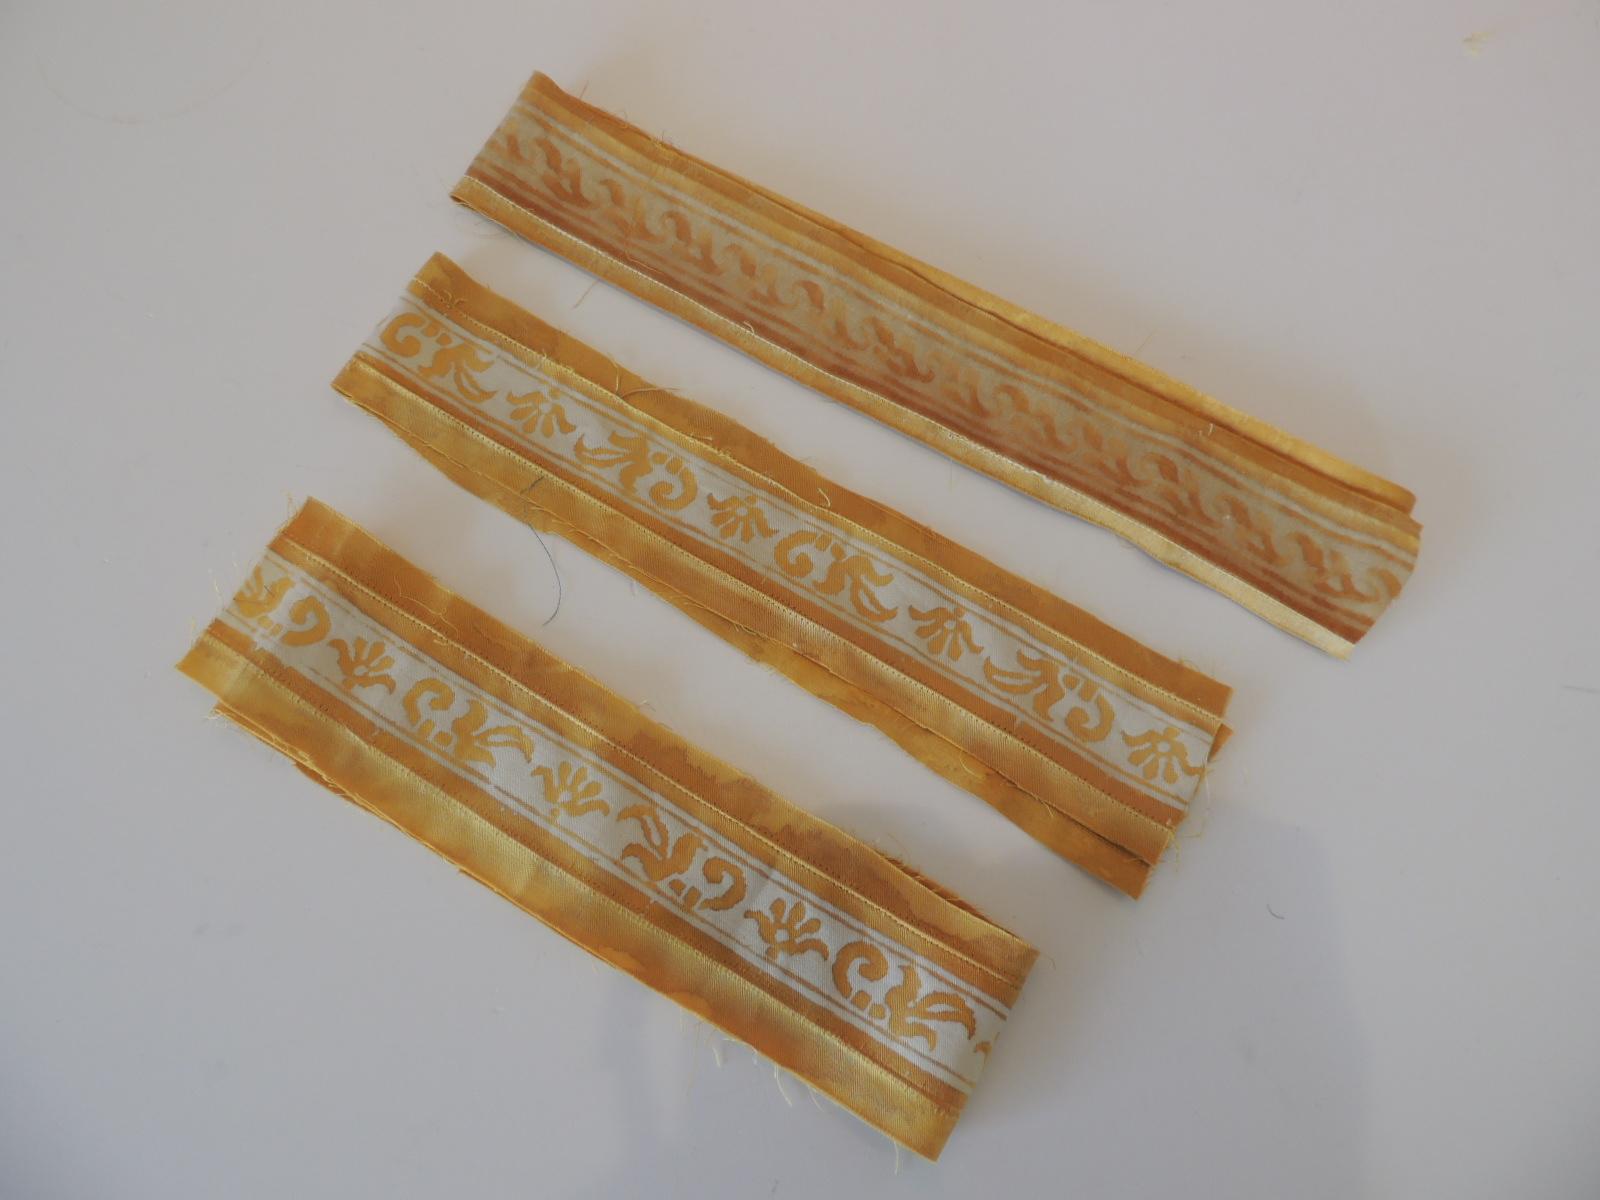 Set of '3' yellow and white fortuny fabric trims
Top: 2.25